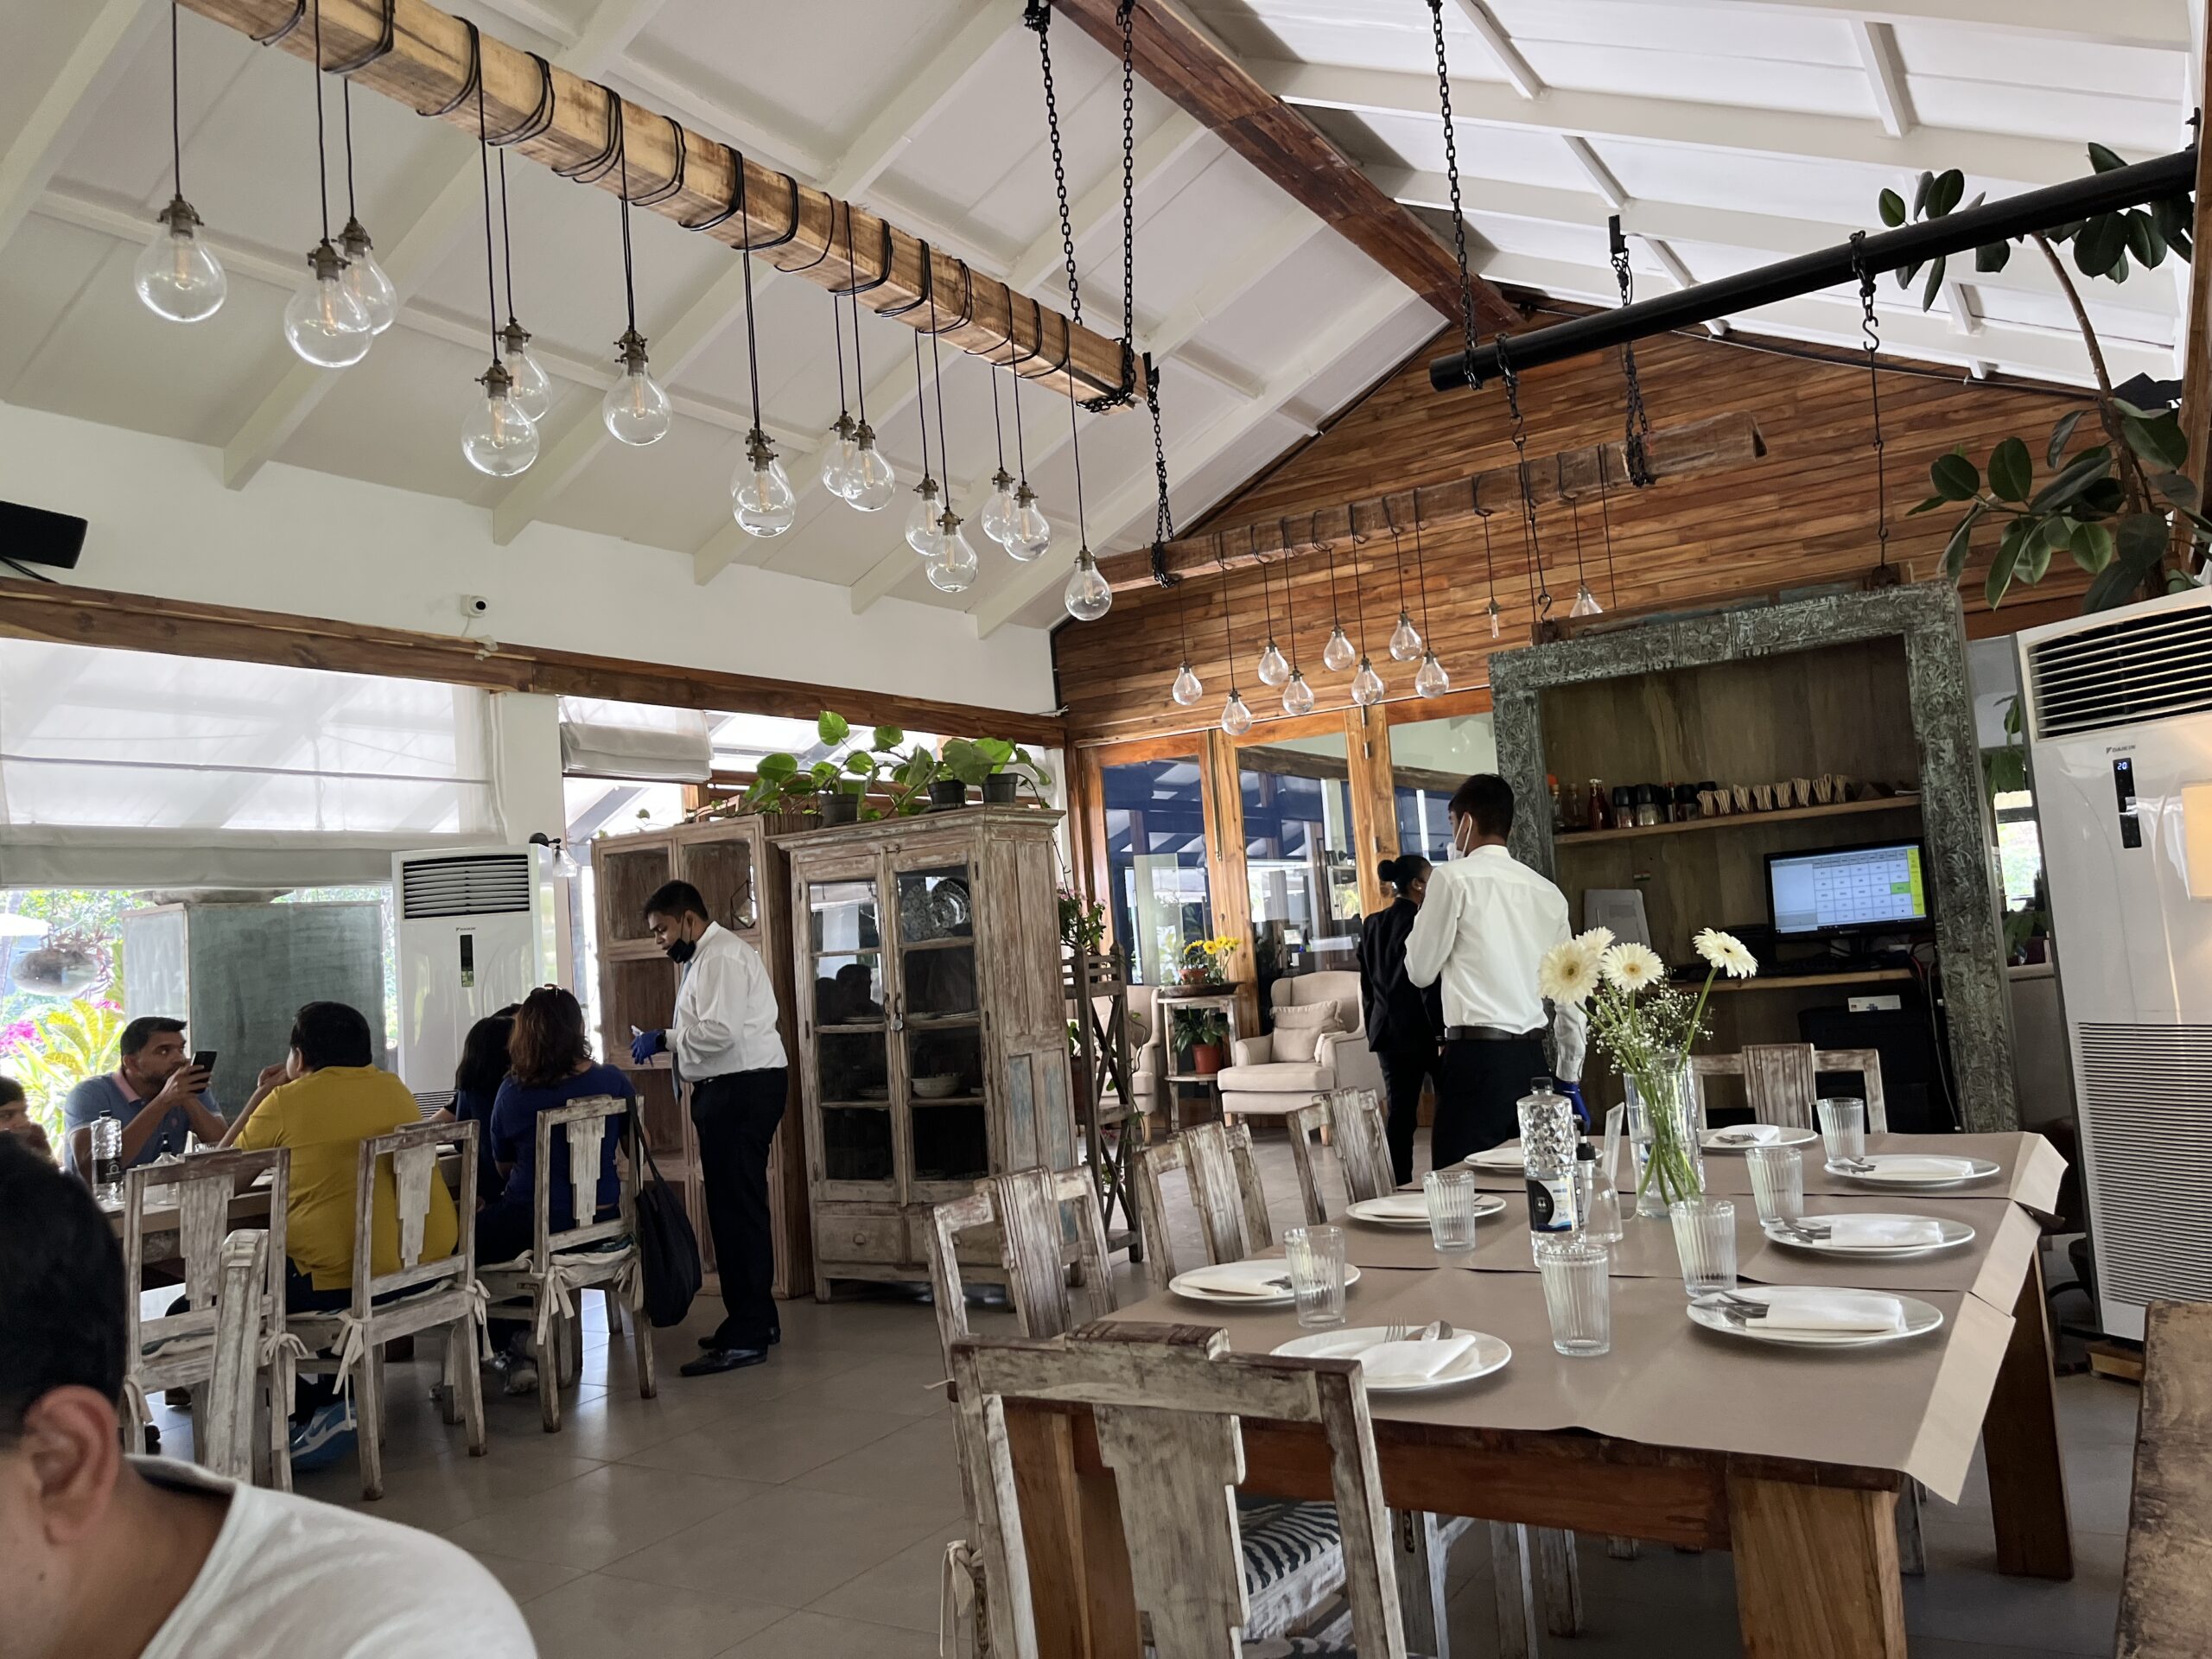 Saltt Restaurant at oleander farms for a weekend trip in Mumbai